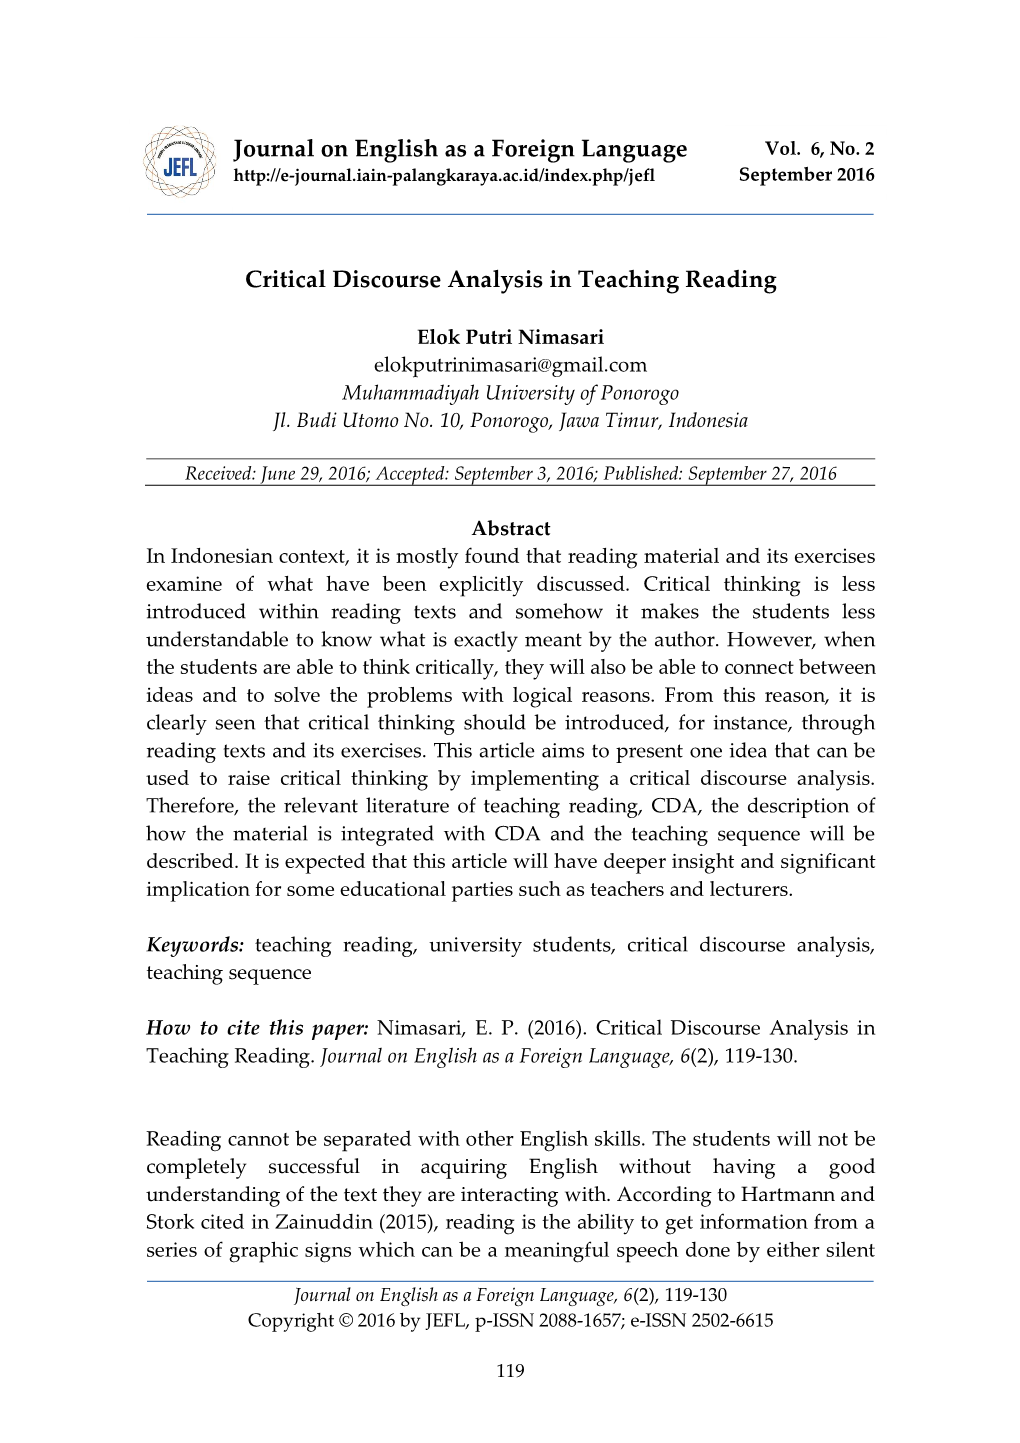 Critical Discourse Analysis in Teaching Reading Journal On